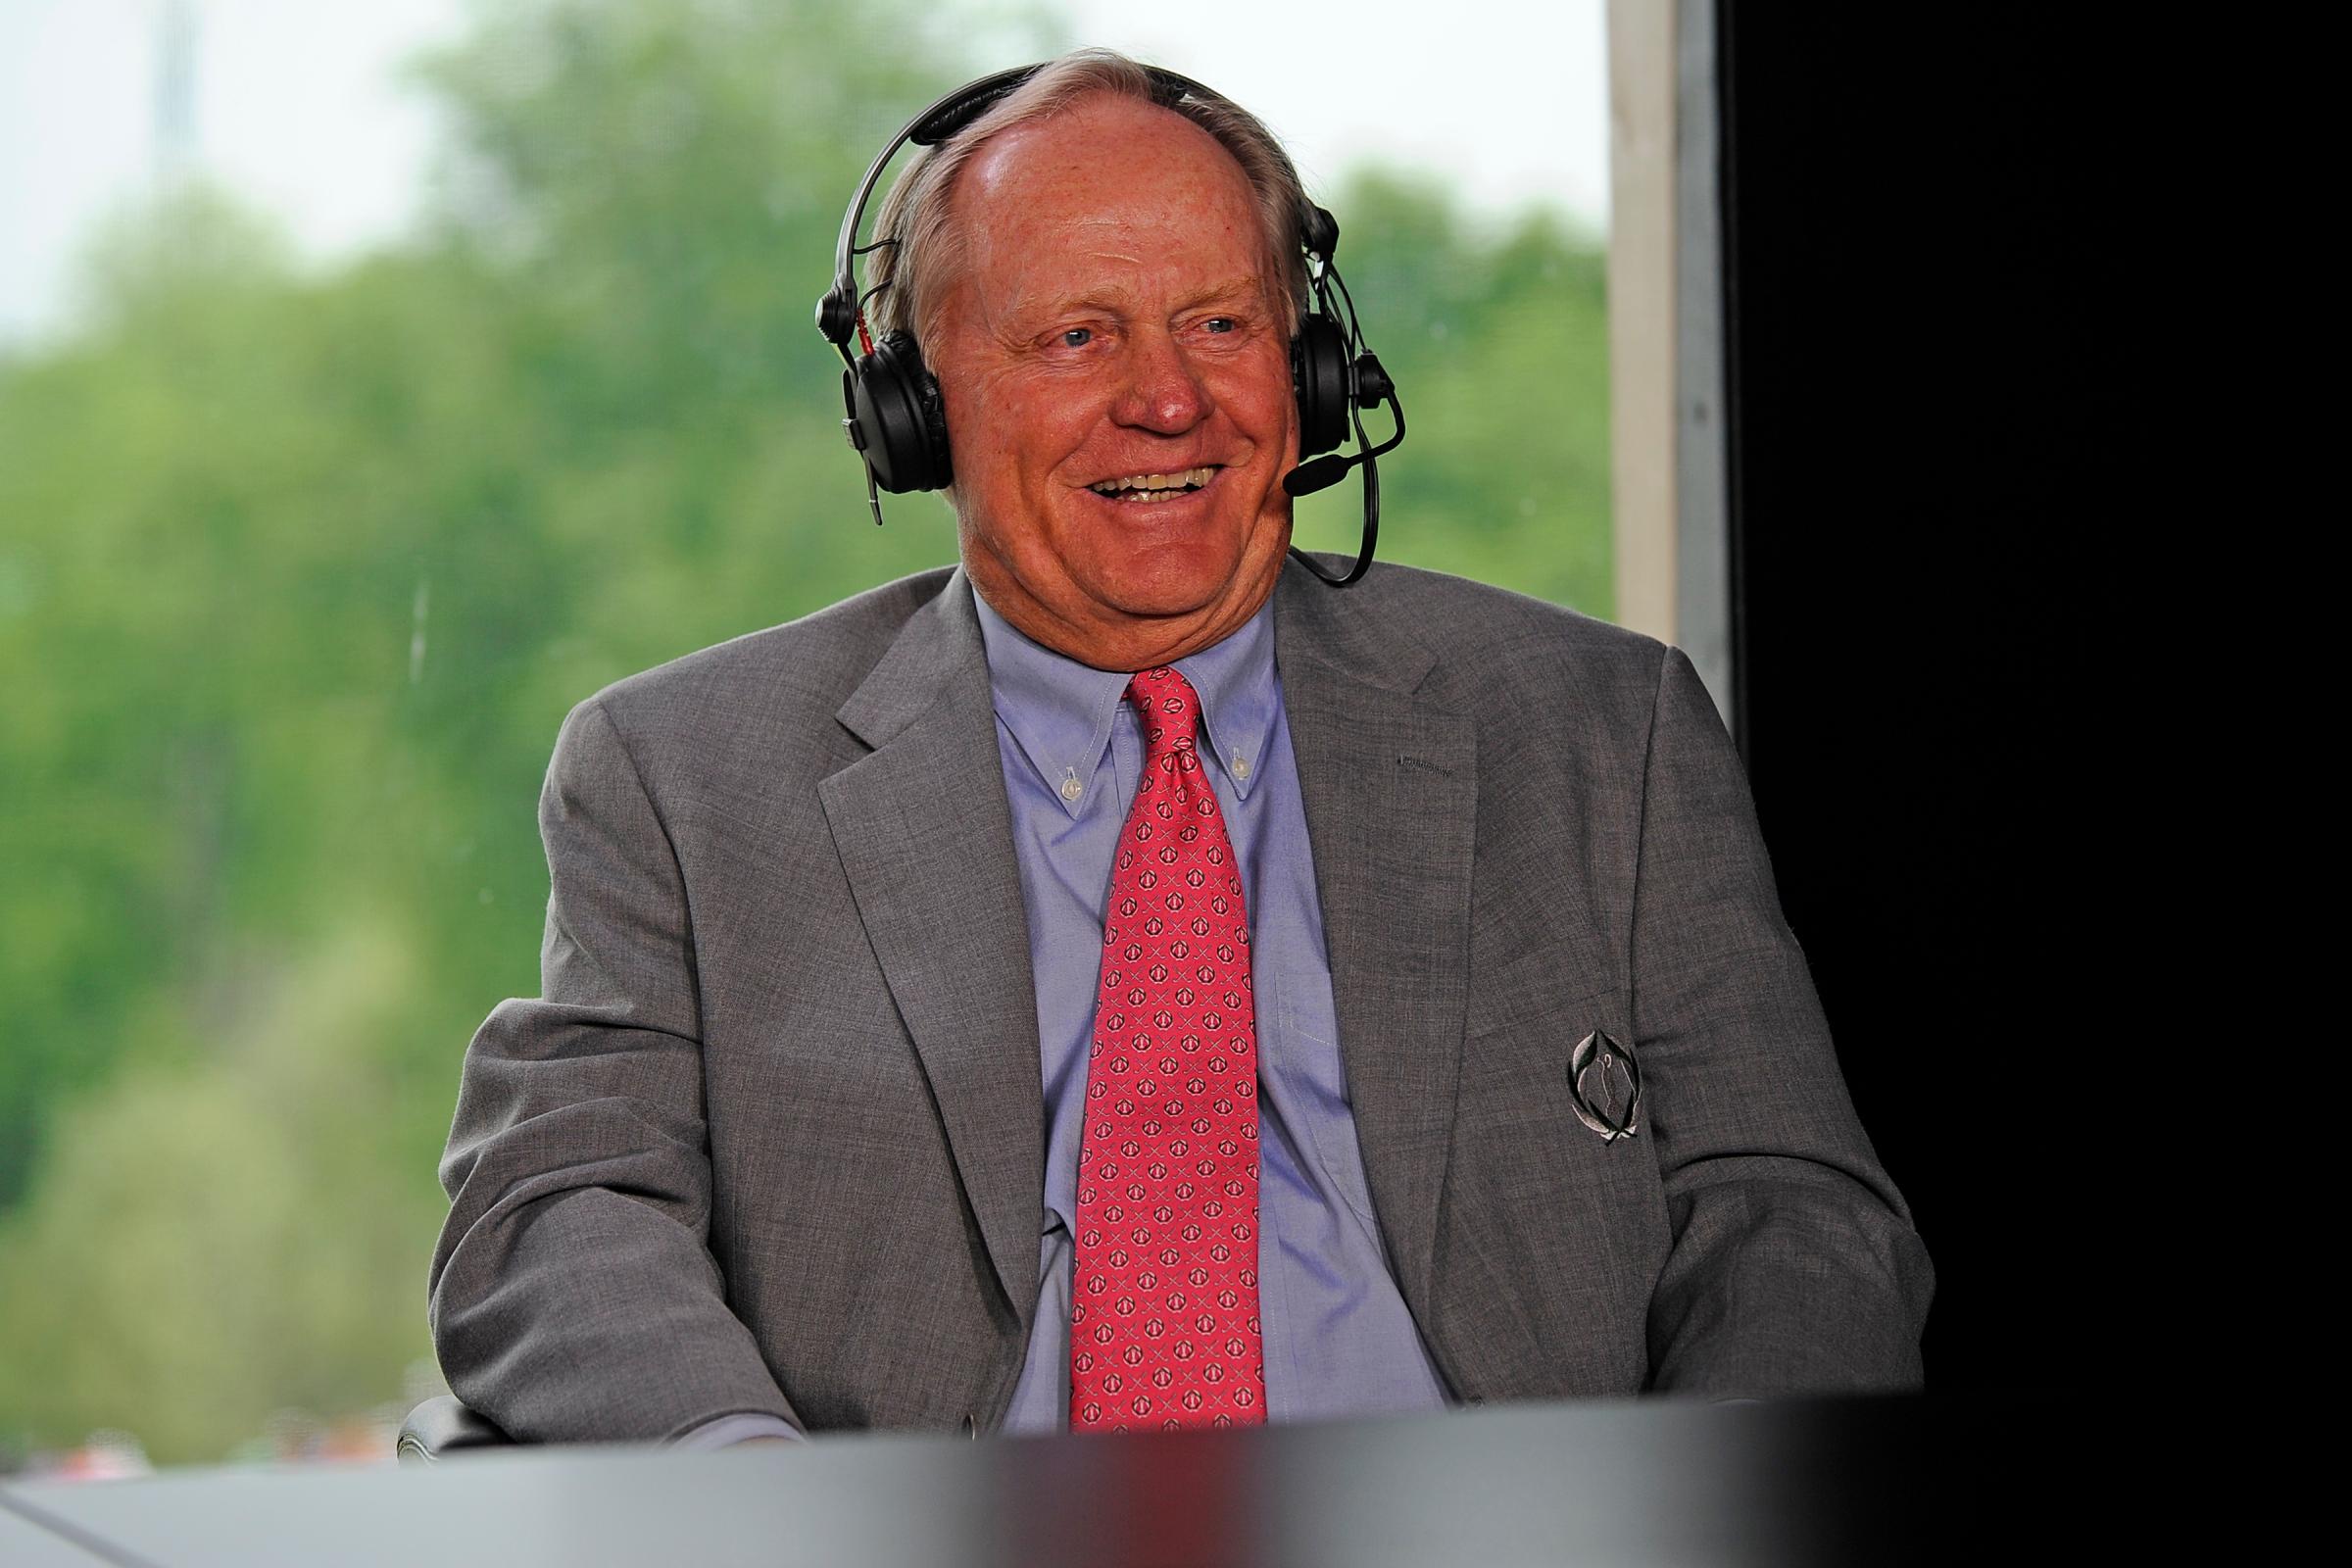 Tournament Host Jack Nicklaus Visits the CBS broadcast set during the third round of the Memorial Tournament presented by Nationwide at Muirfield Village Golf Club on June 4, 2016 in Dublin, Ohio.